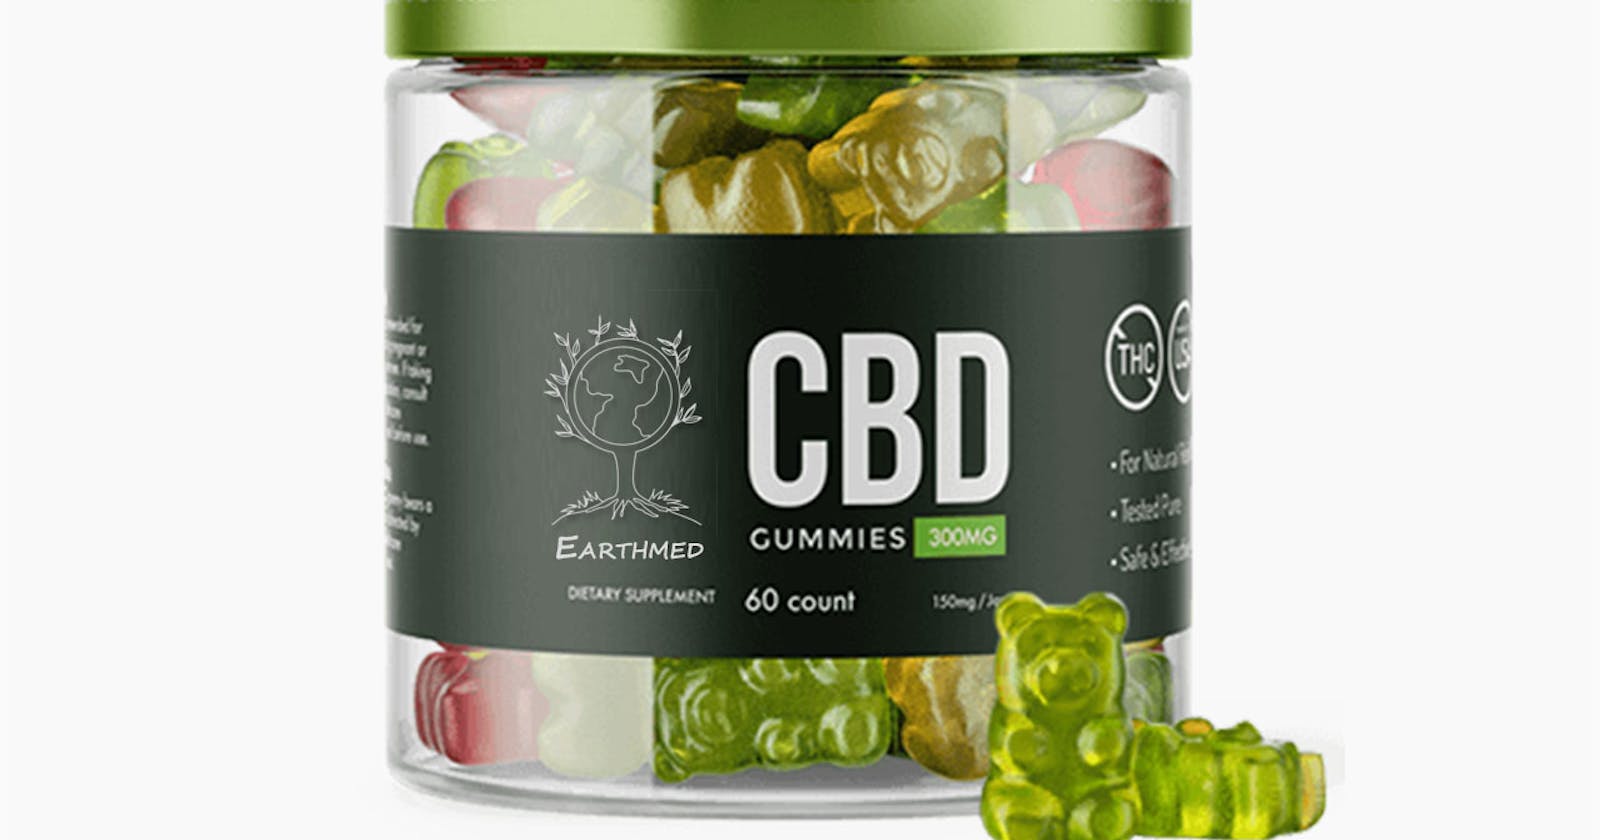 Earthmed CBD Gummies Shark Tank: How They Can Help You Achieve Natural Relief from Pain, Anxiety, and Stress